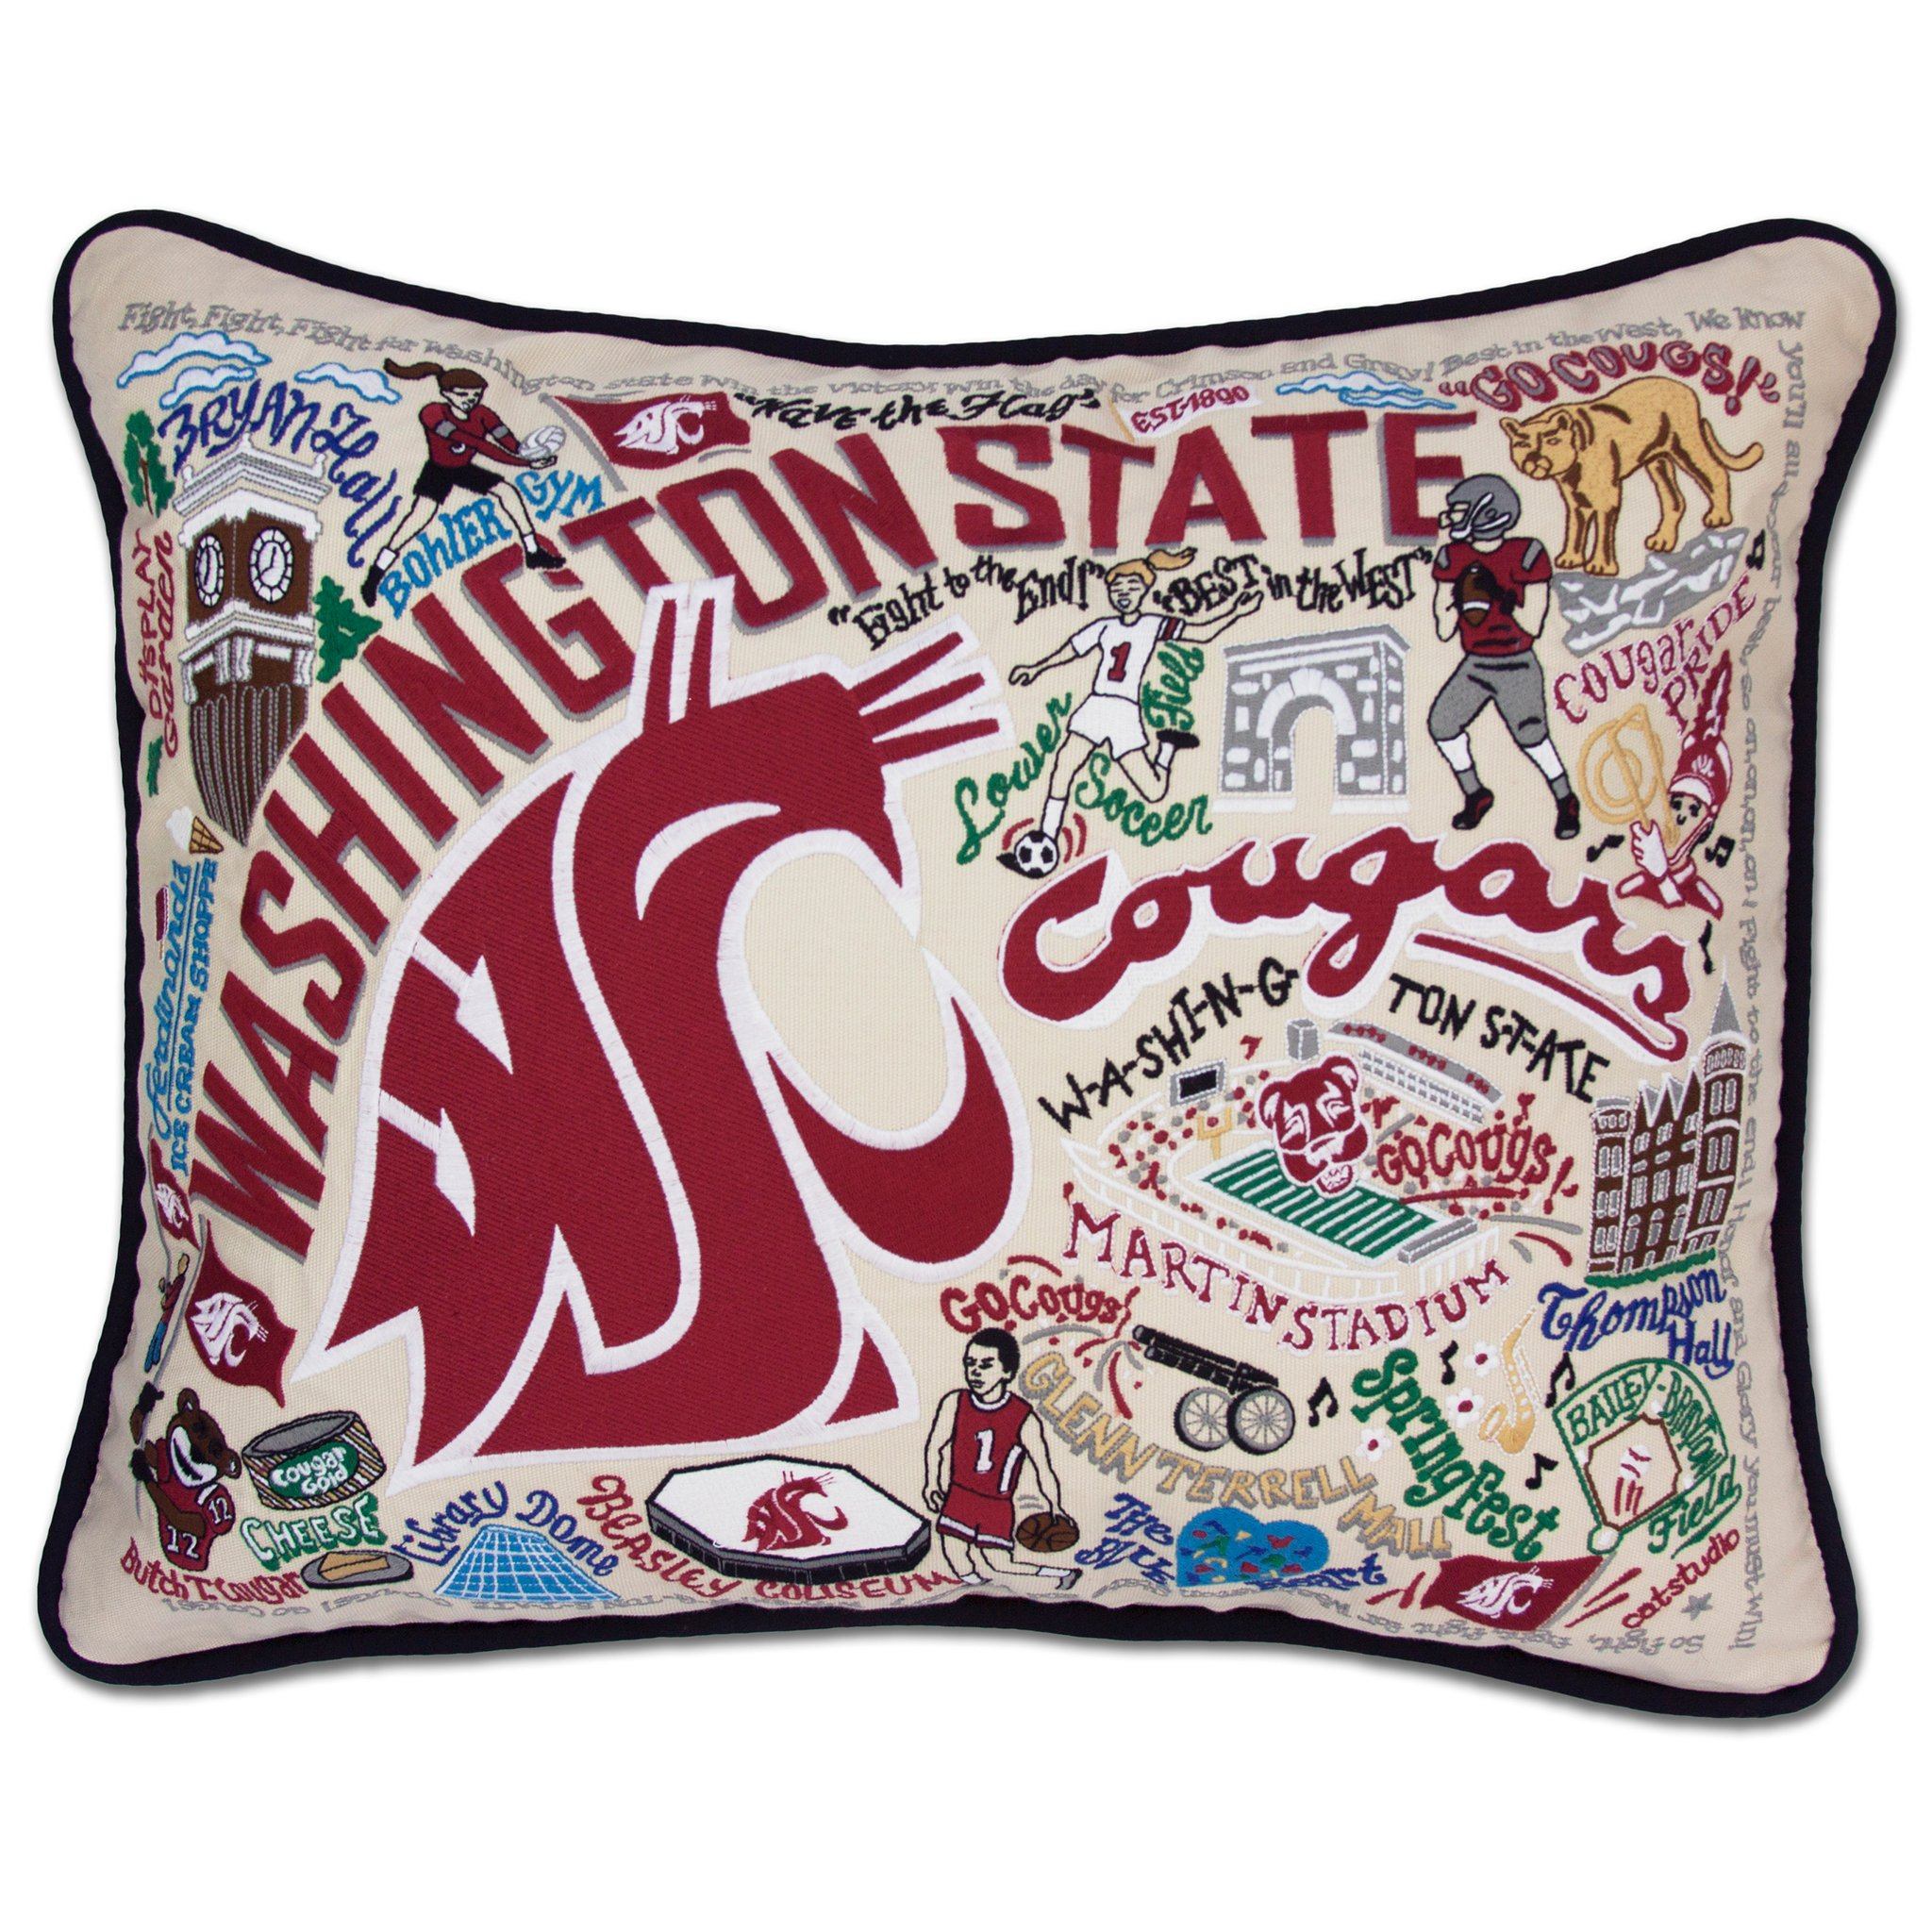 Washington State University Embroidered Pillow Collegiate Collection